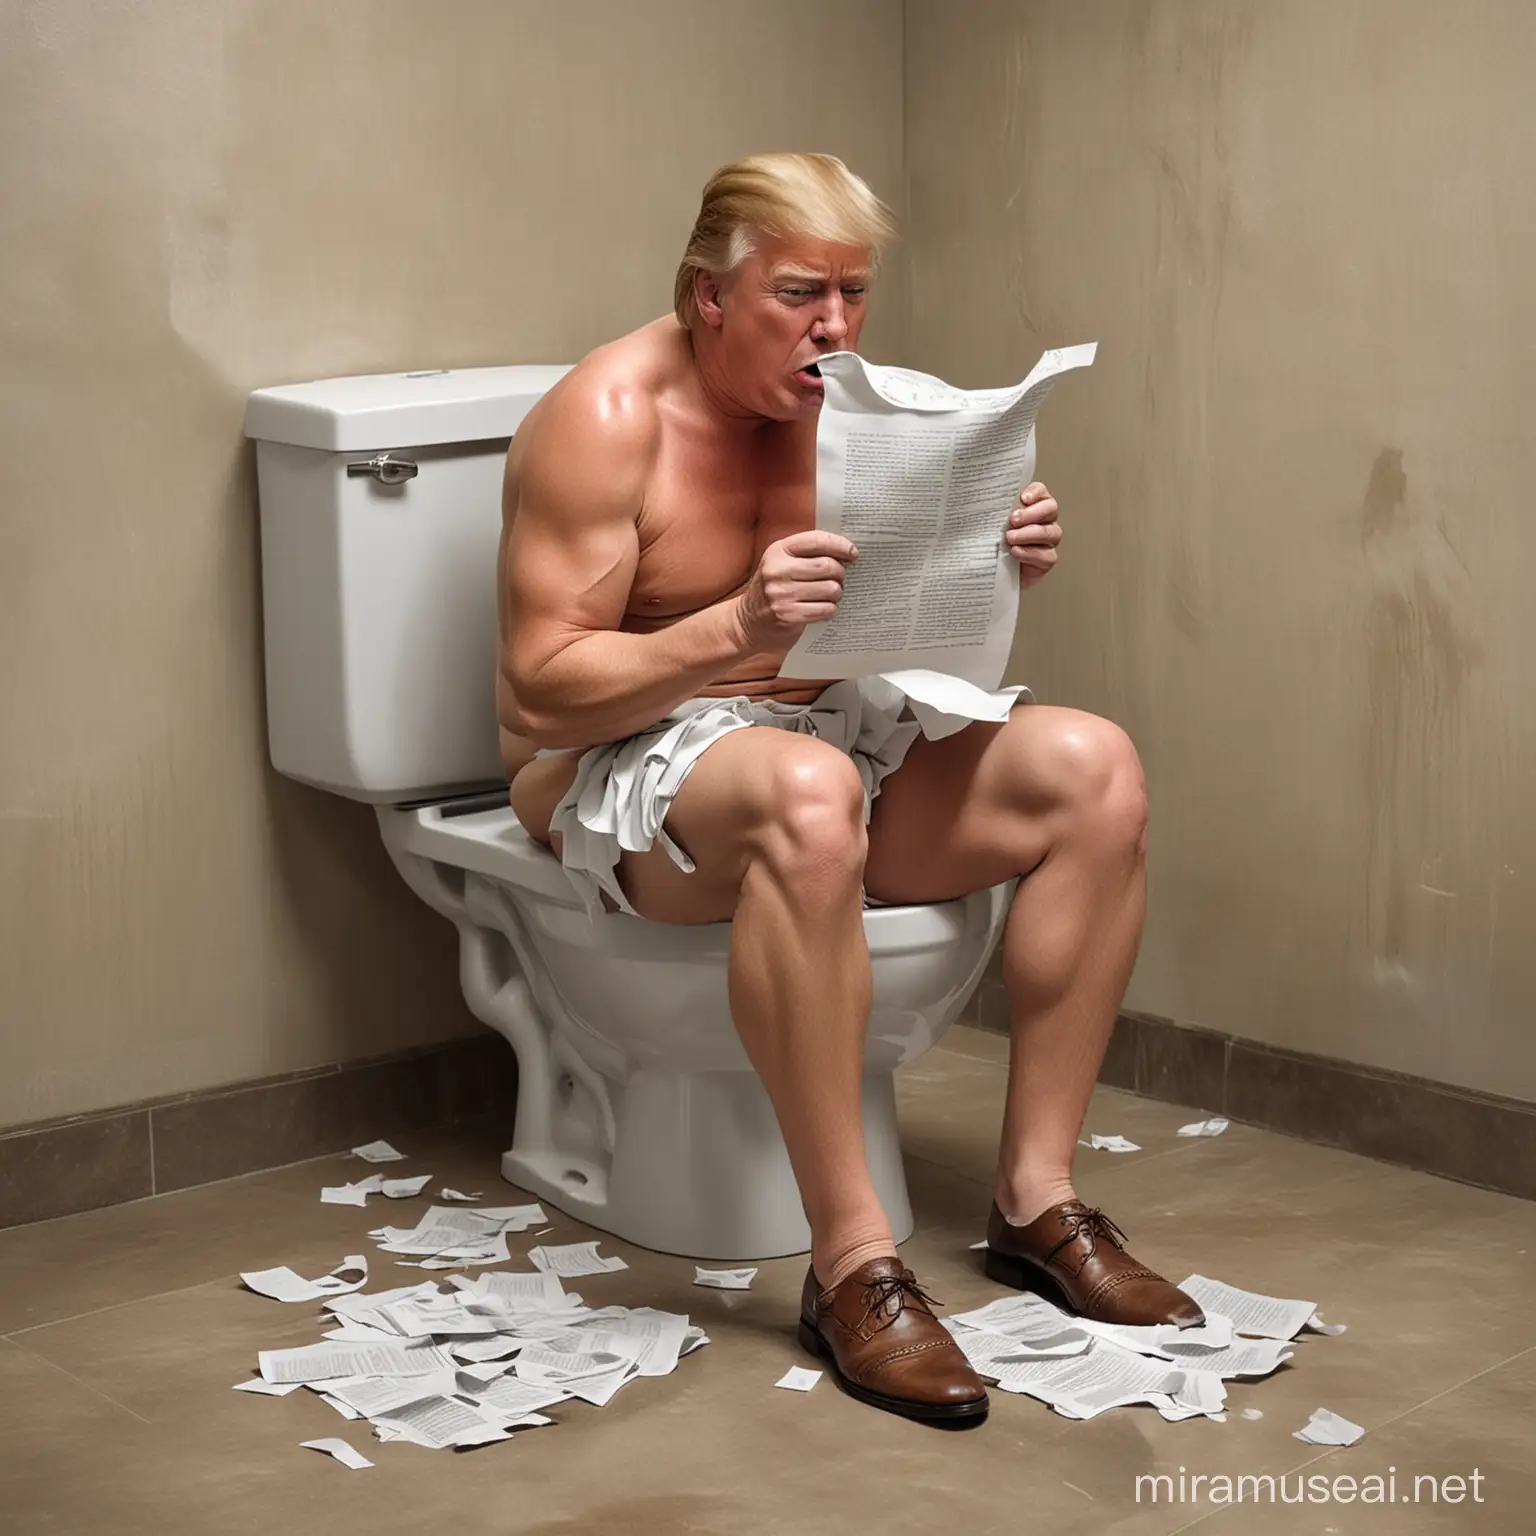 Former President Ronald Trump in Vulnerable Moment on Toilet with Manuscript Pages